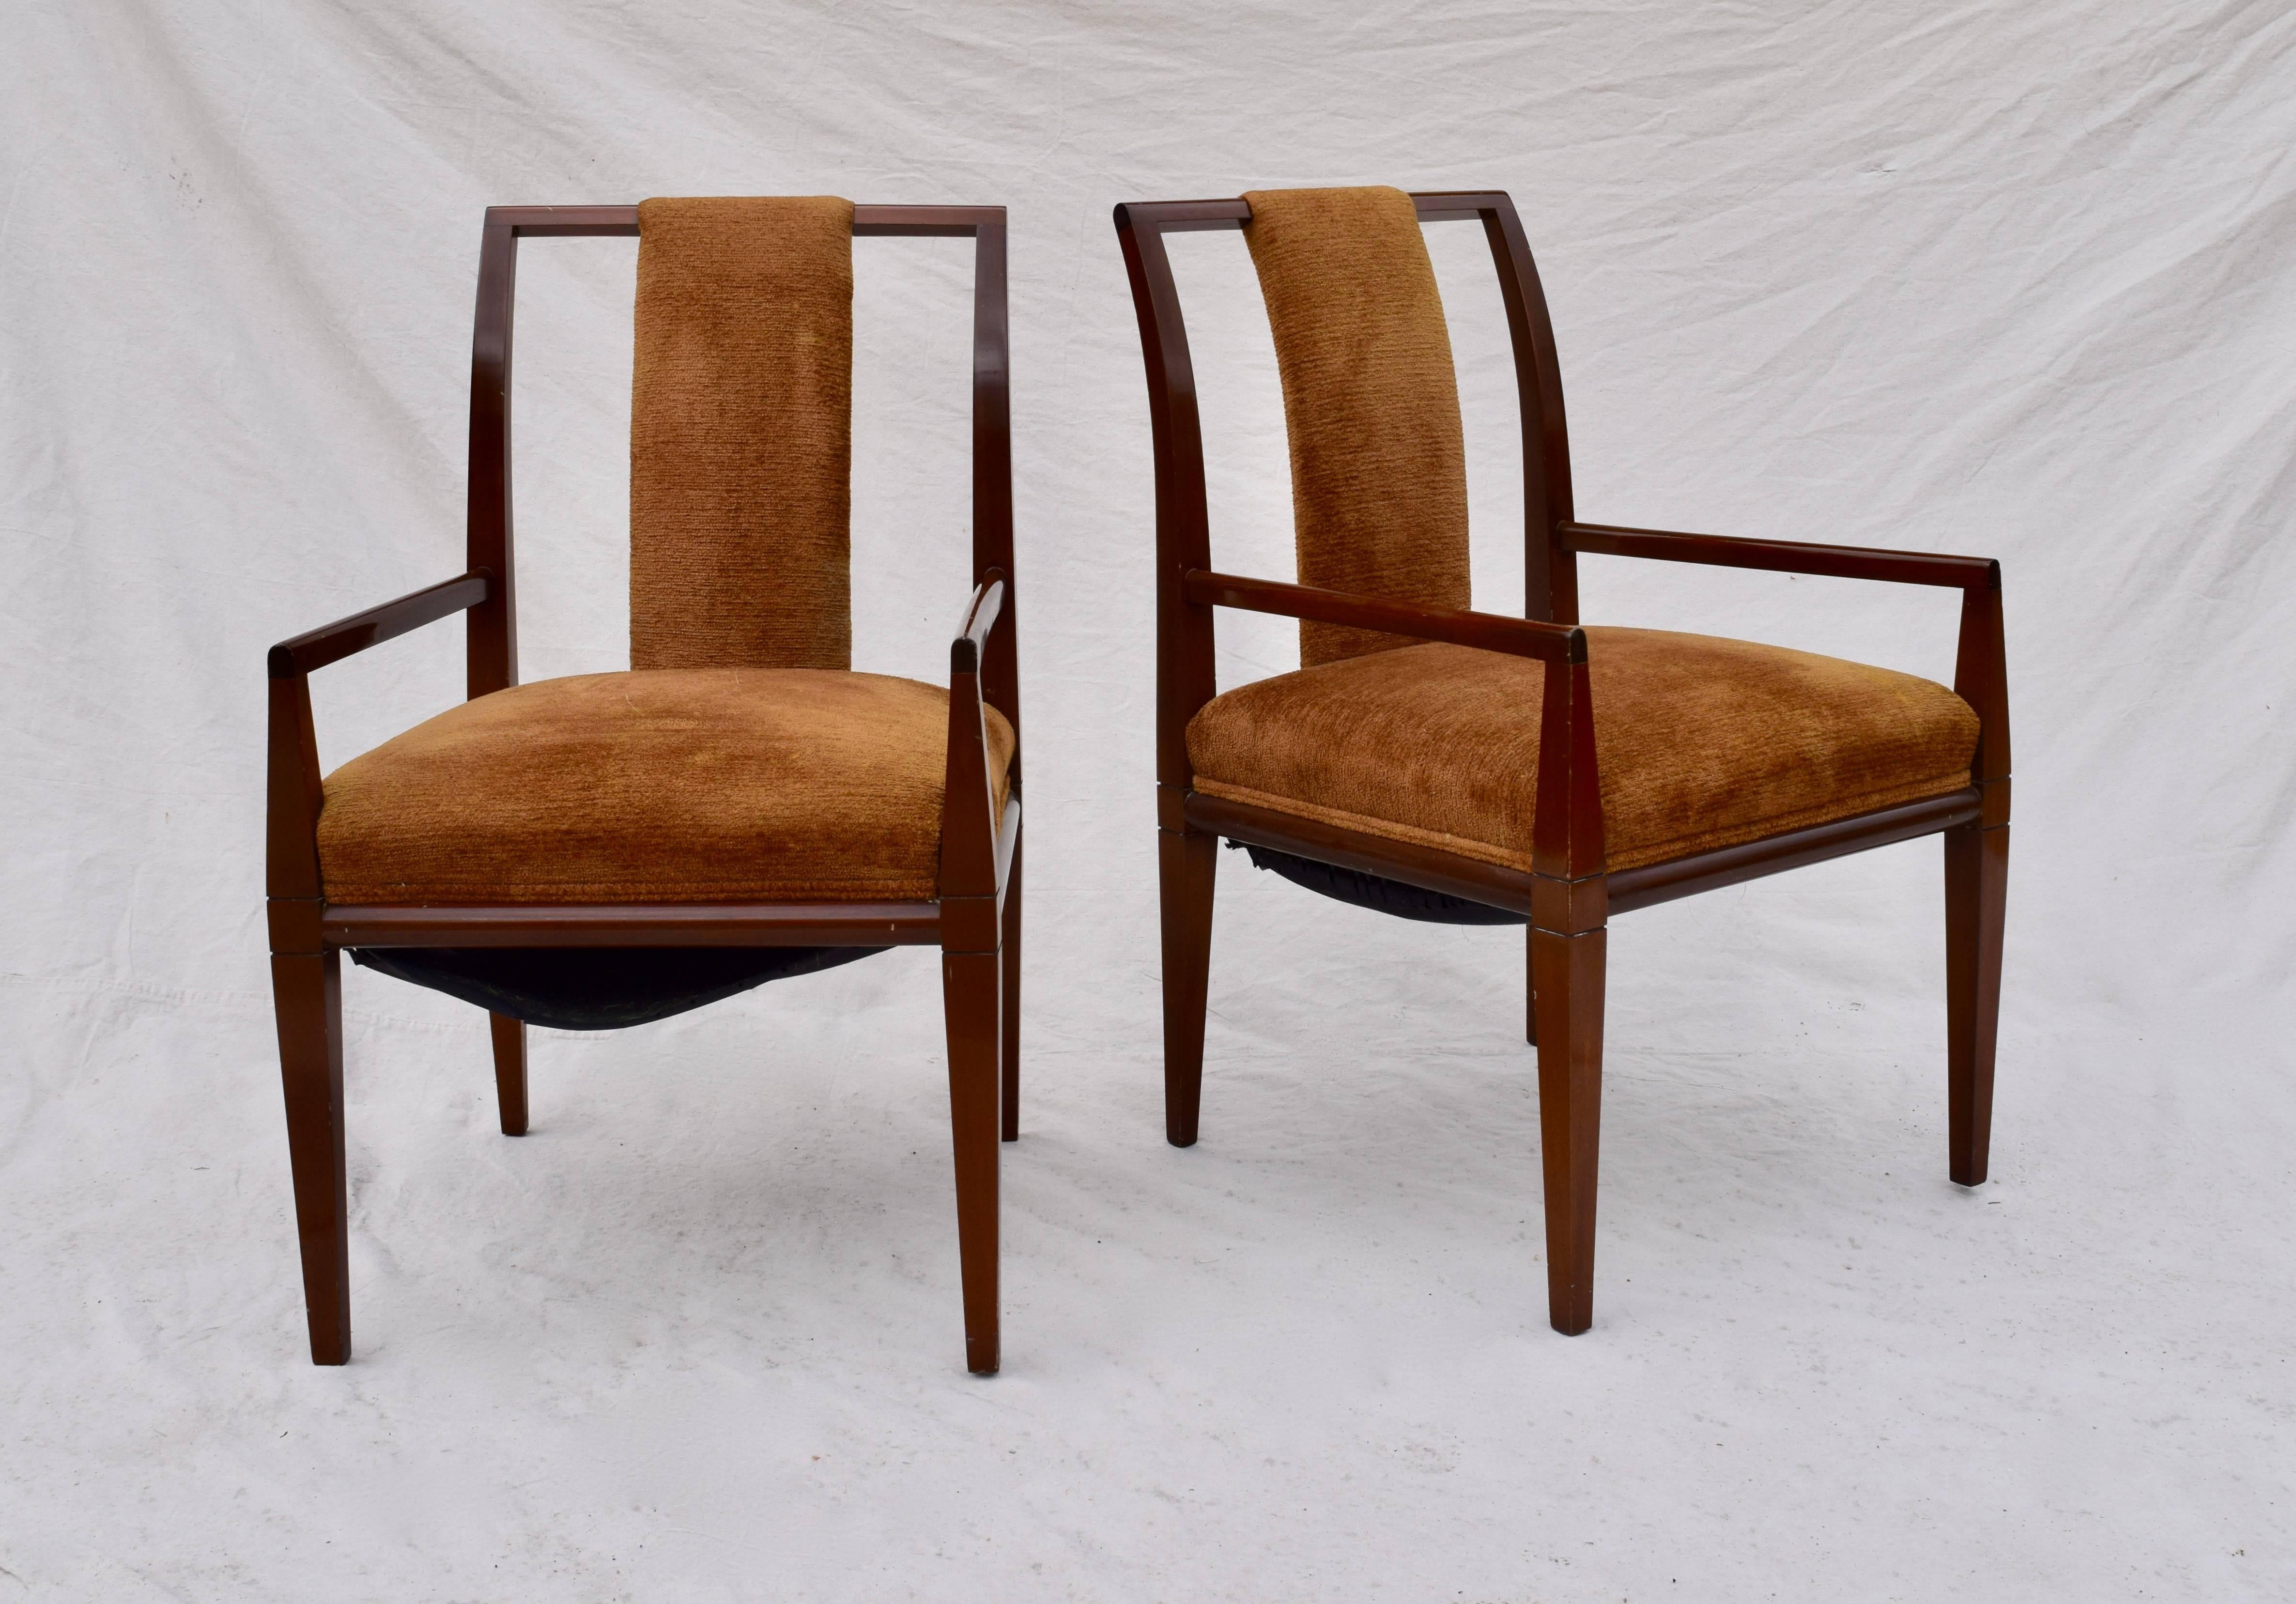 Fabric Tommi Parzinger Dining Chairs